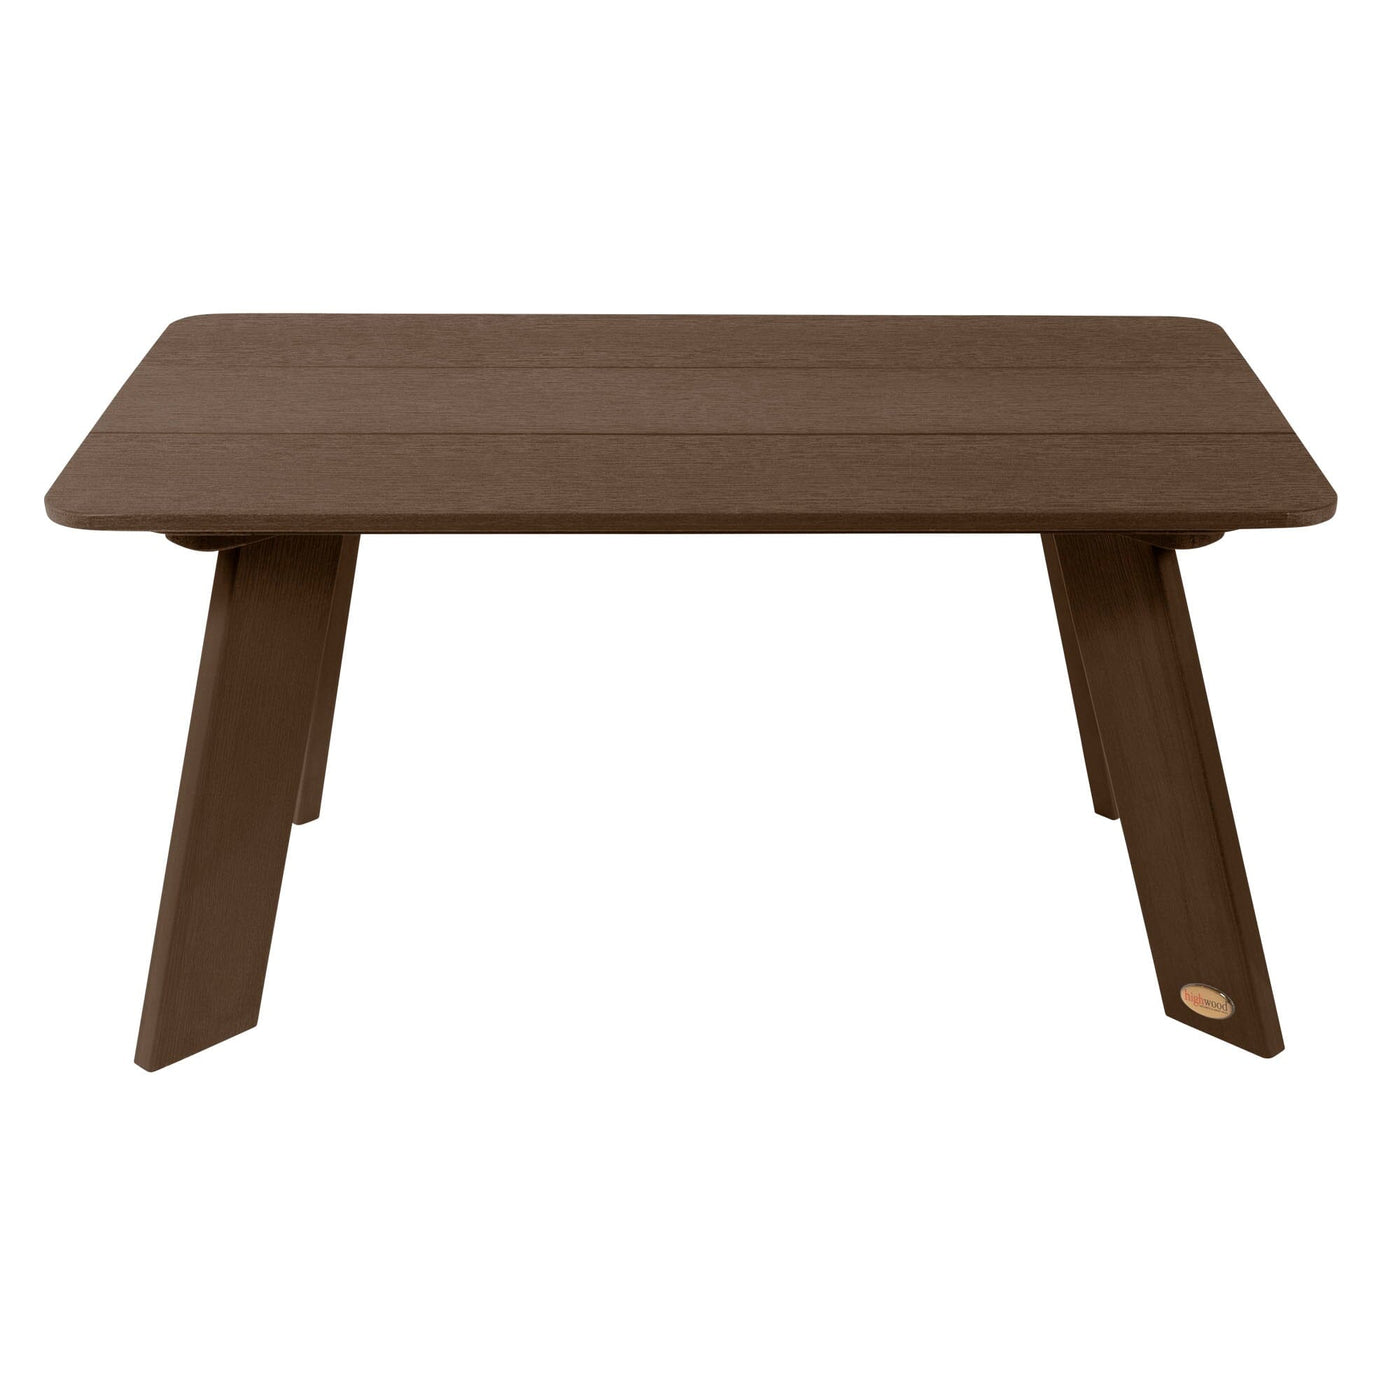 Italica Conversation table in Weathered Acorn Brown. 